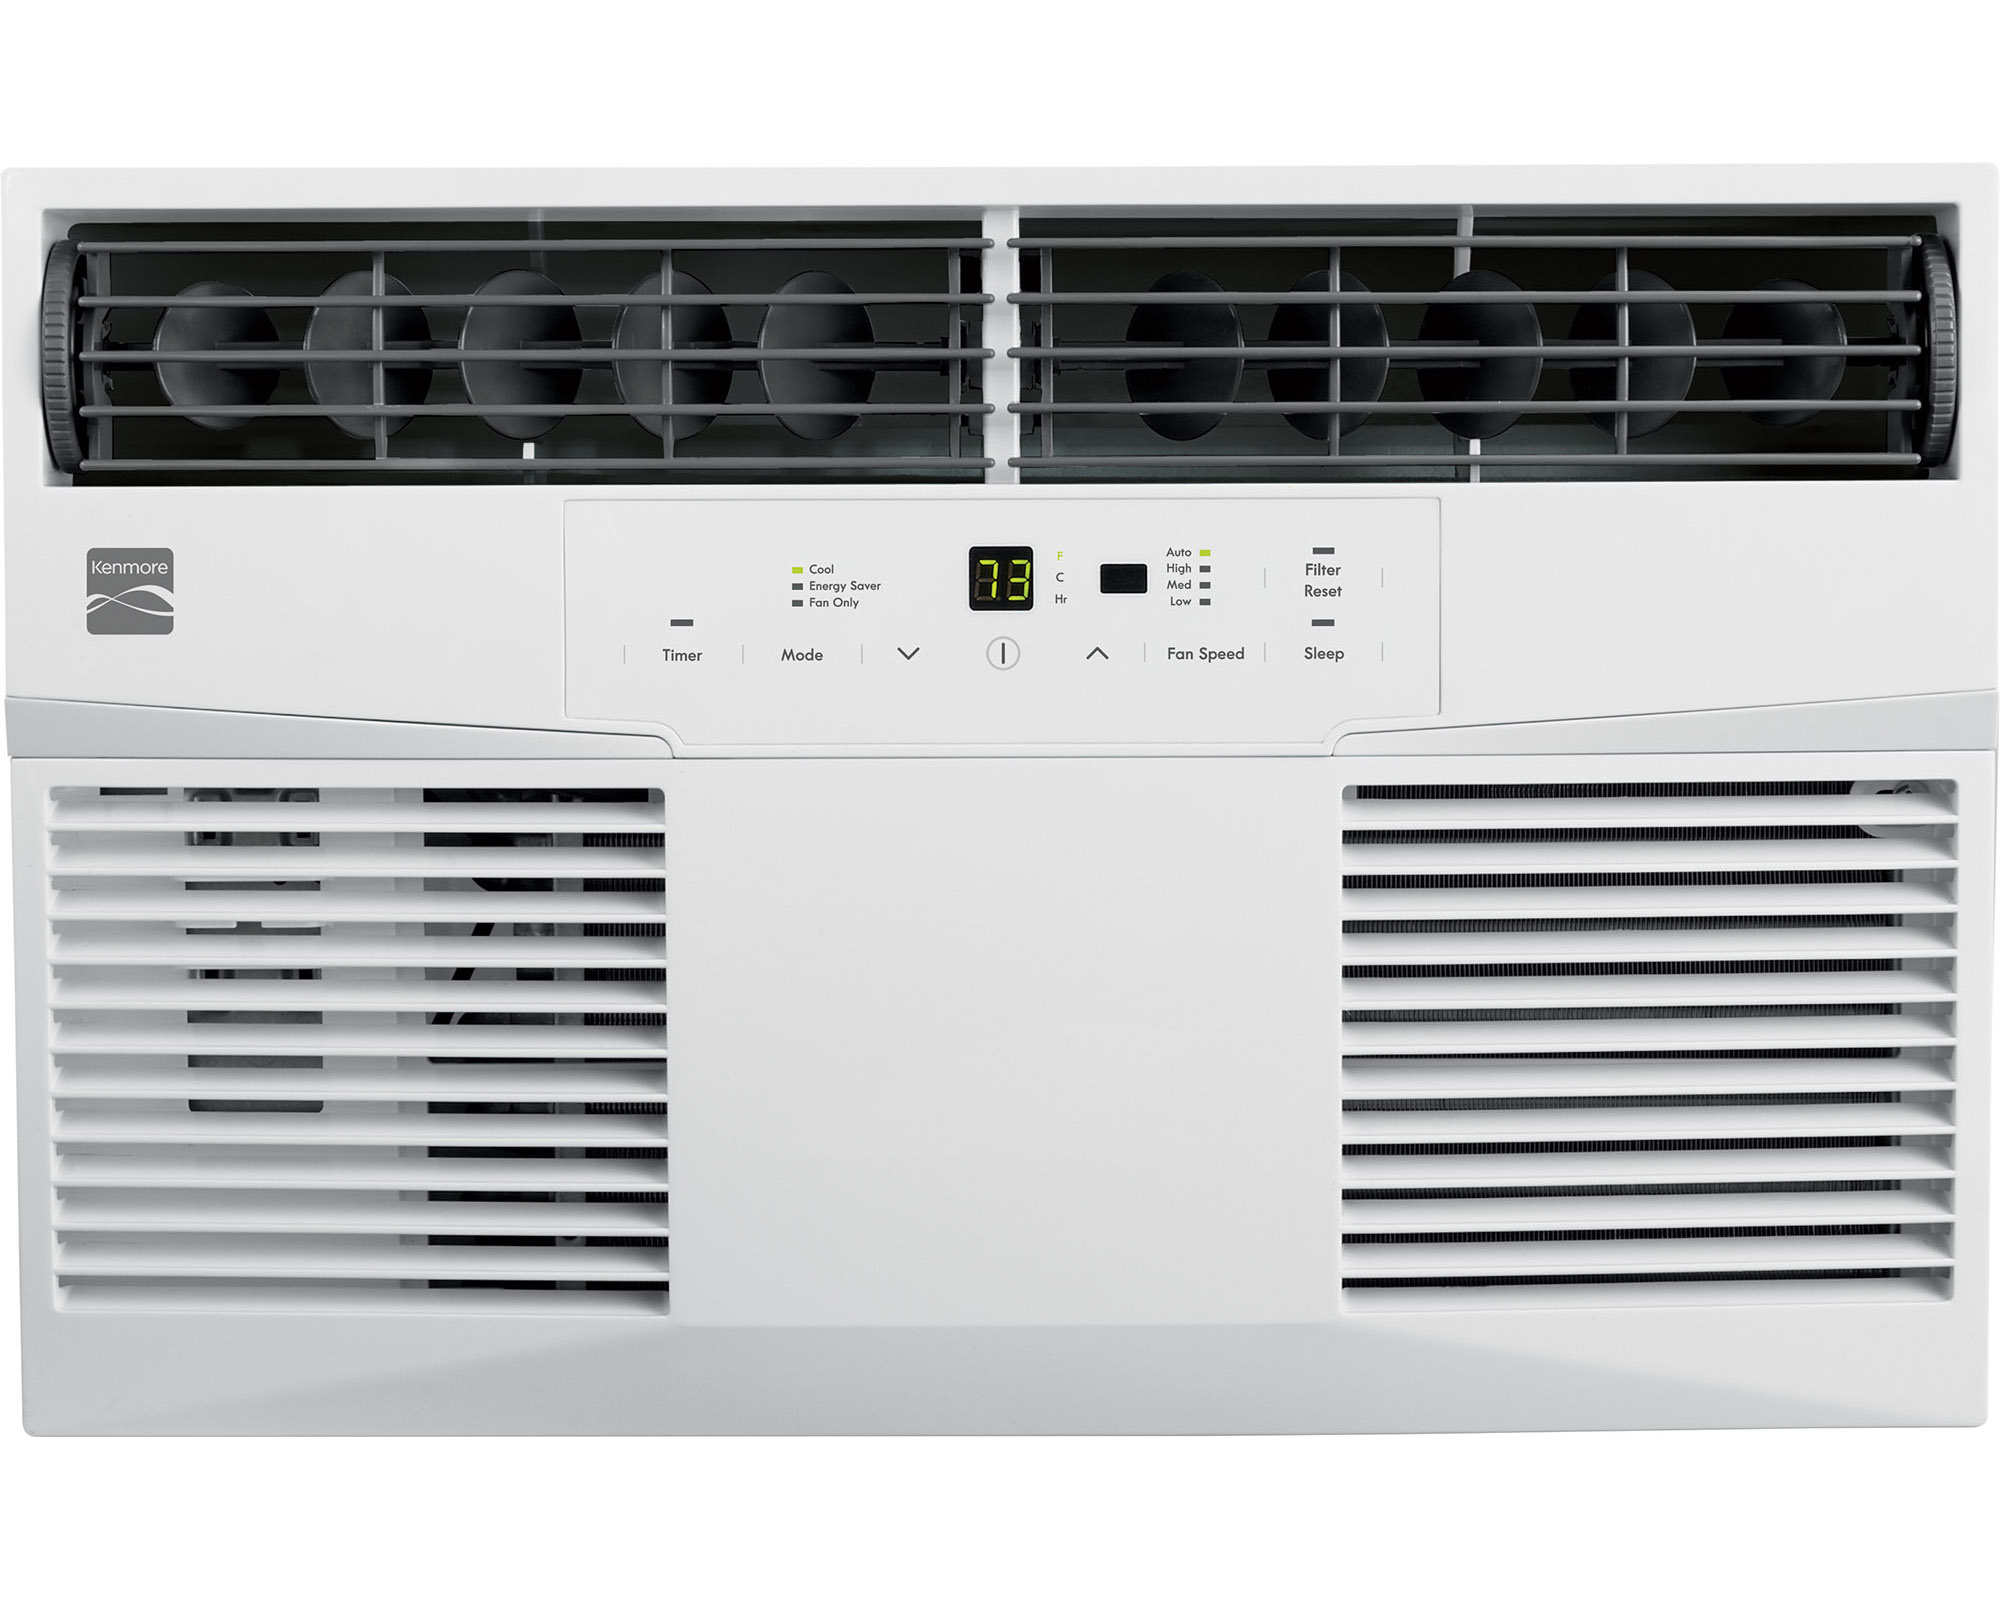 6000 btu air conditioner cools what size room